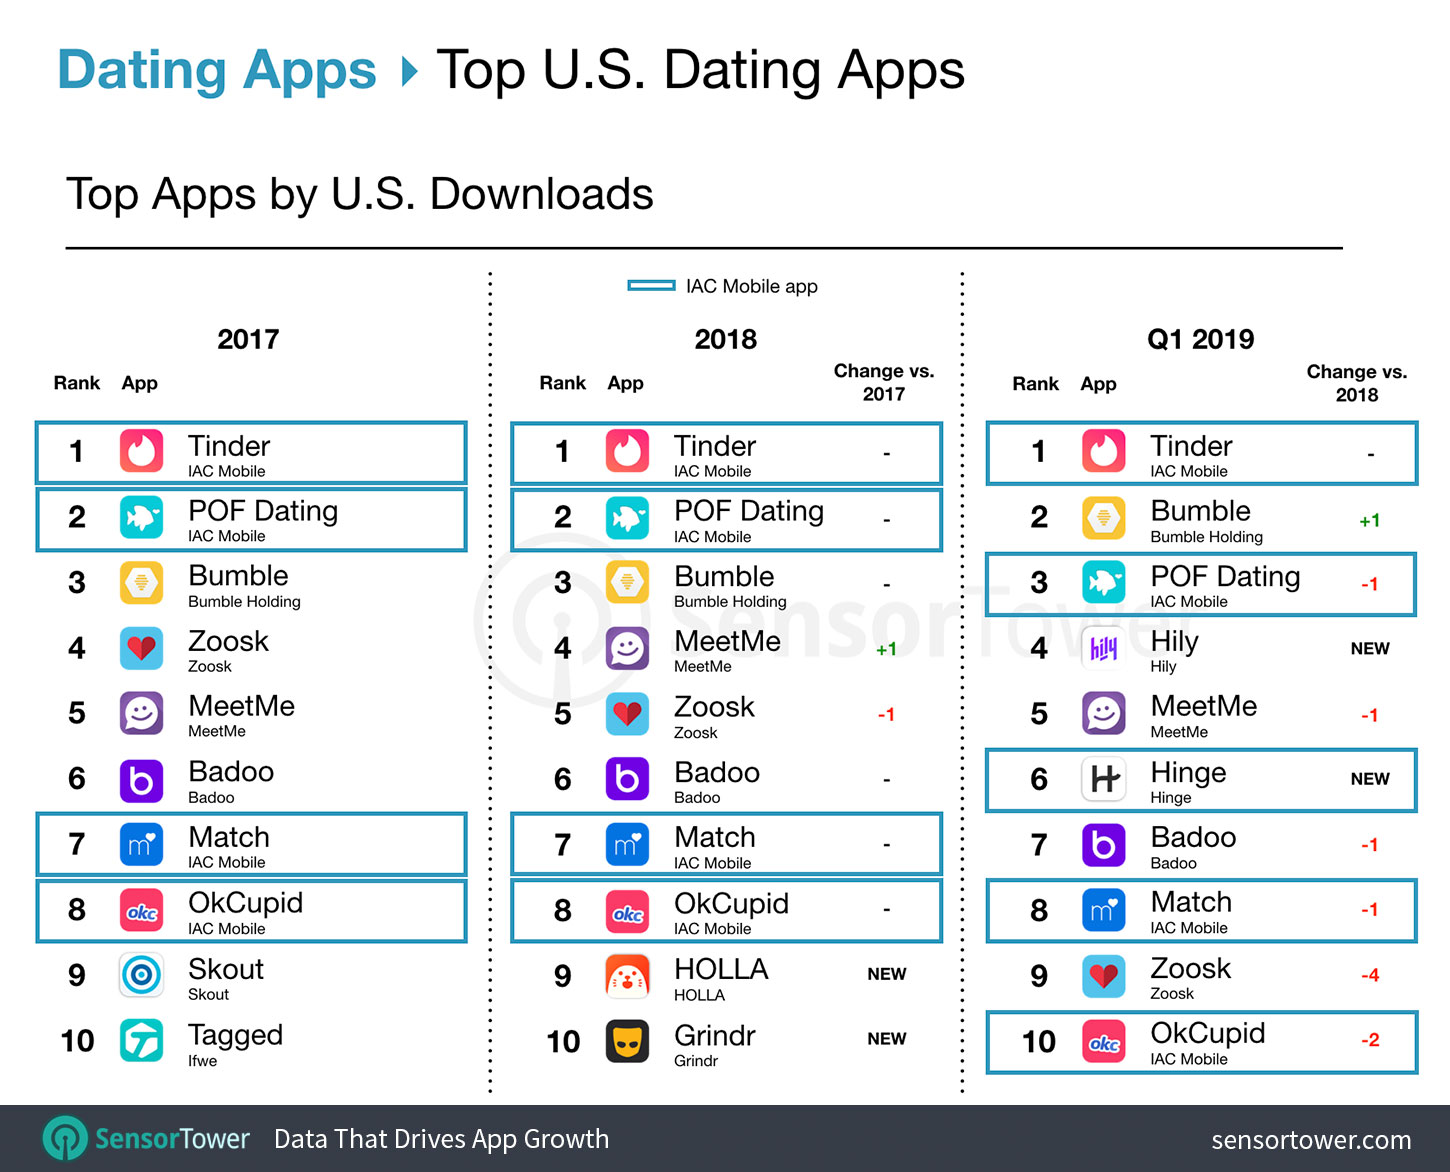 Record Number of Dating Apps Surpassed 1 Million Revenue in Q1 2019